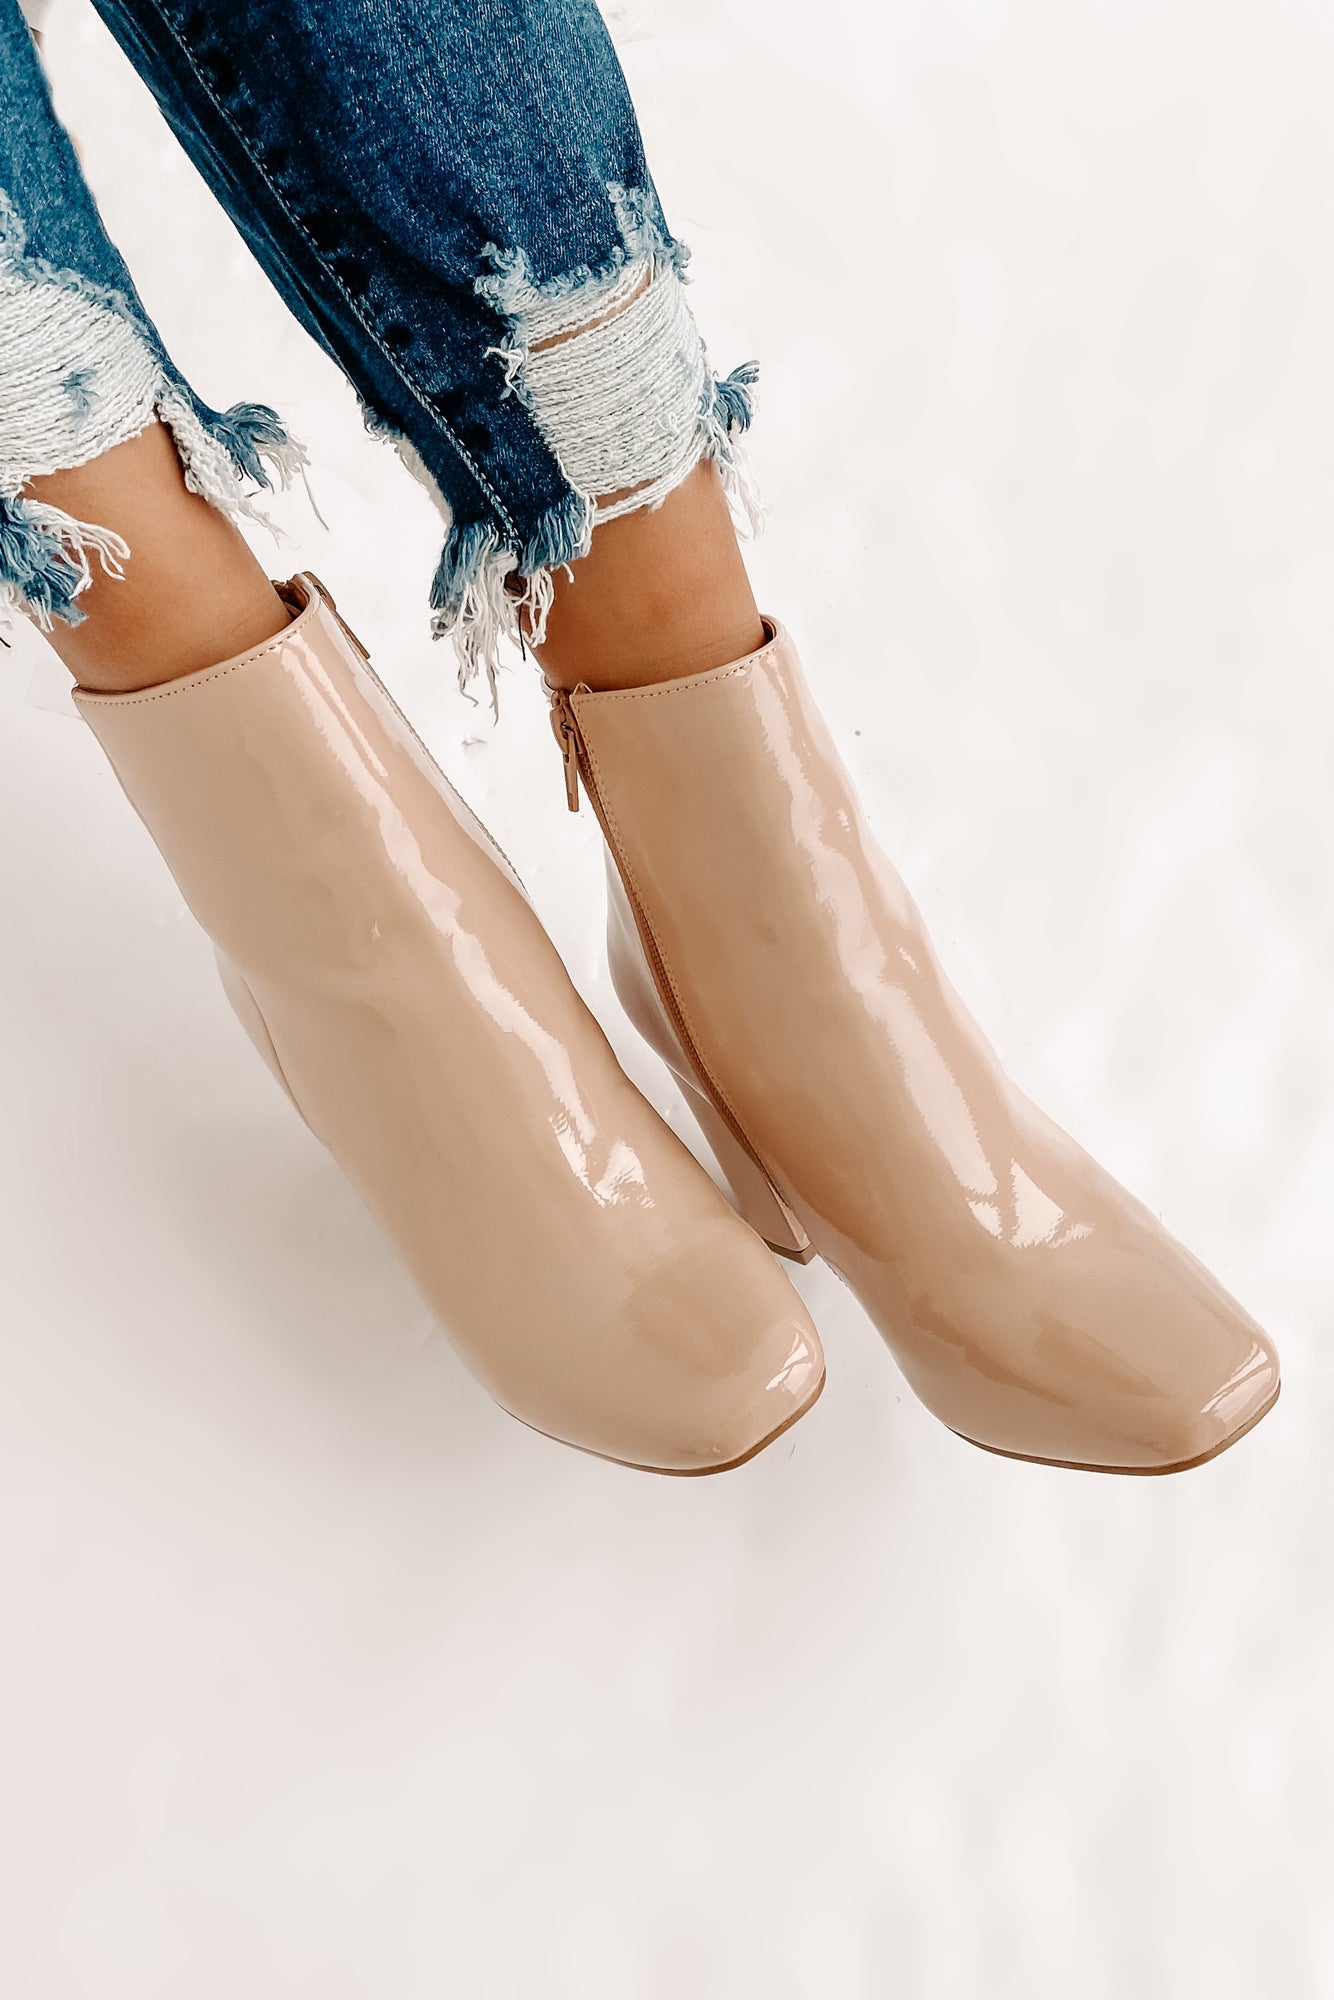 Women's Show Up & Show Off Patent Leather Heeled Ankle Booties in Nude Patent - Size 6